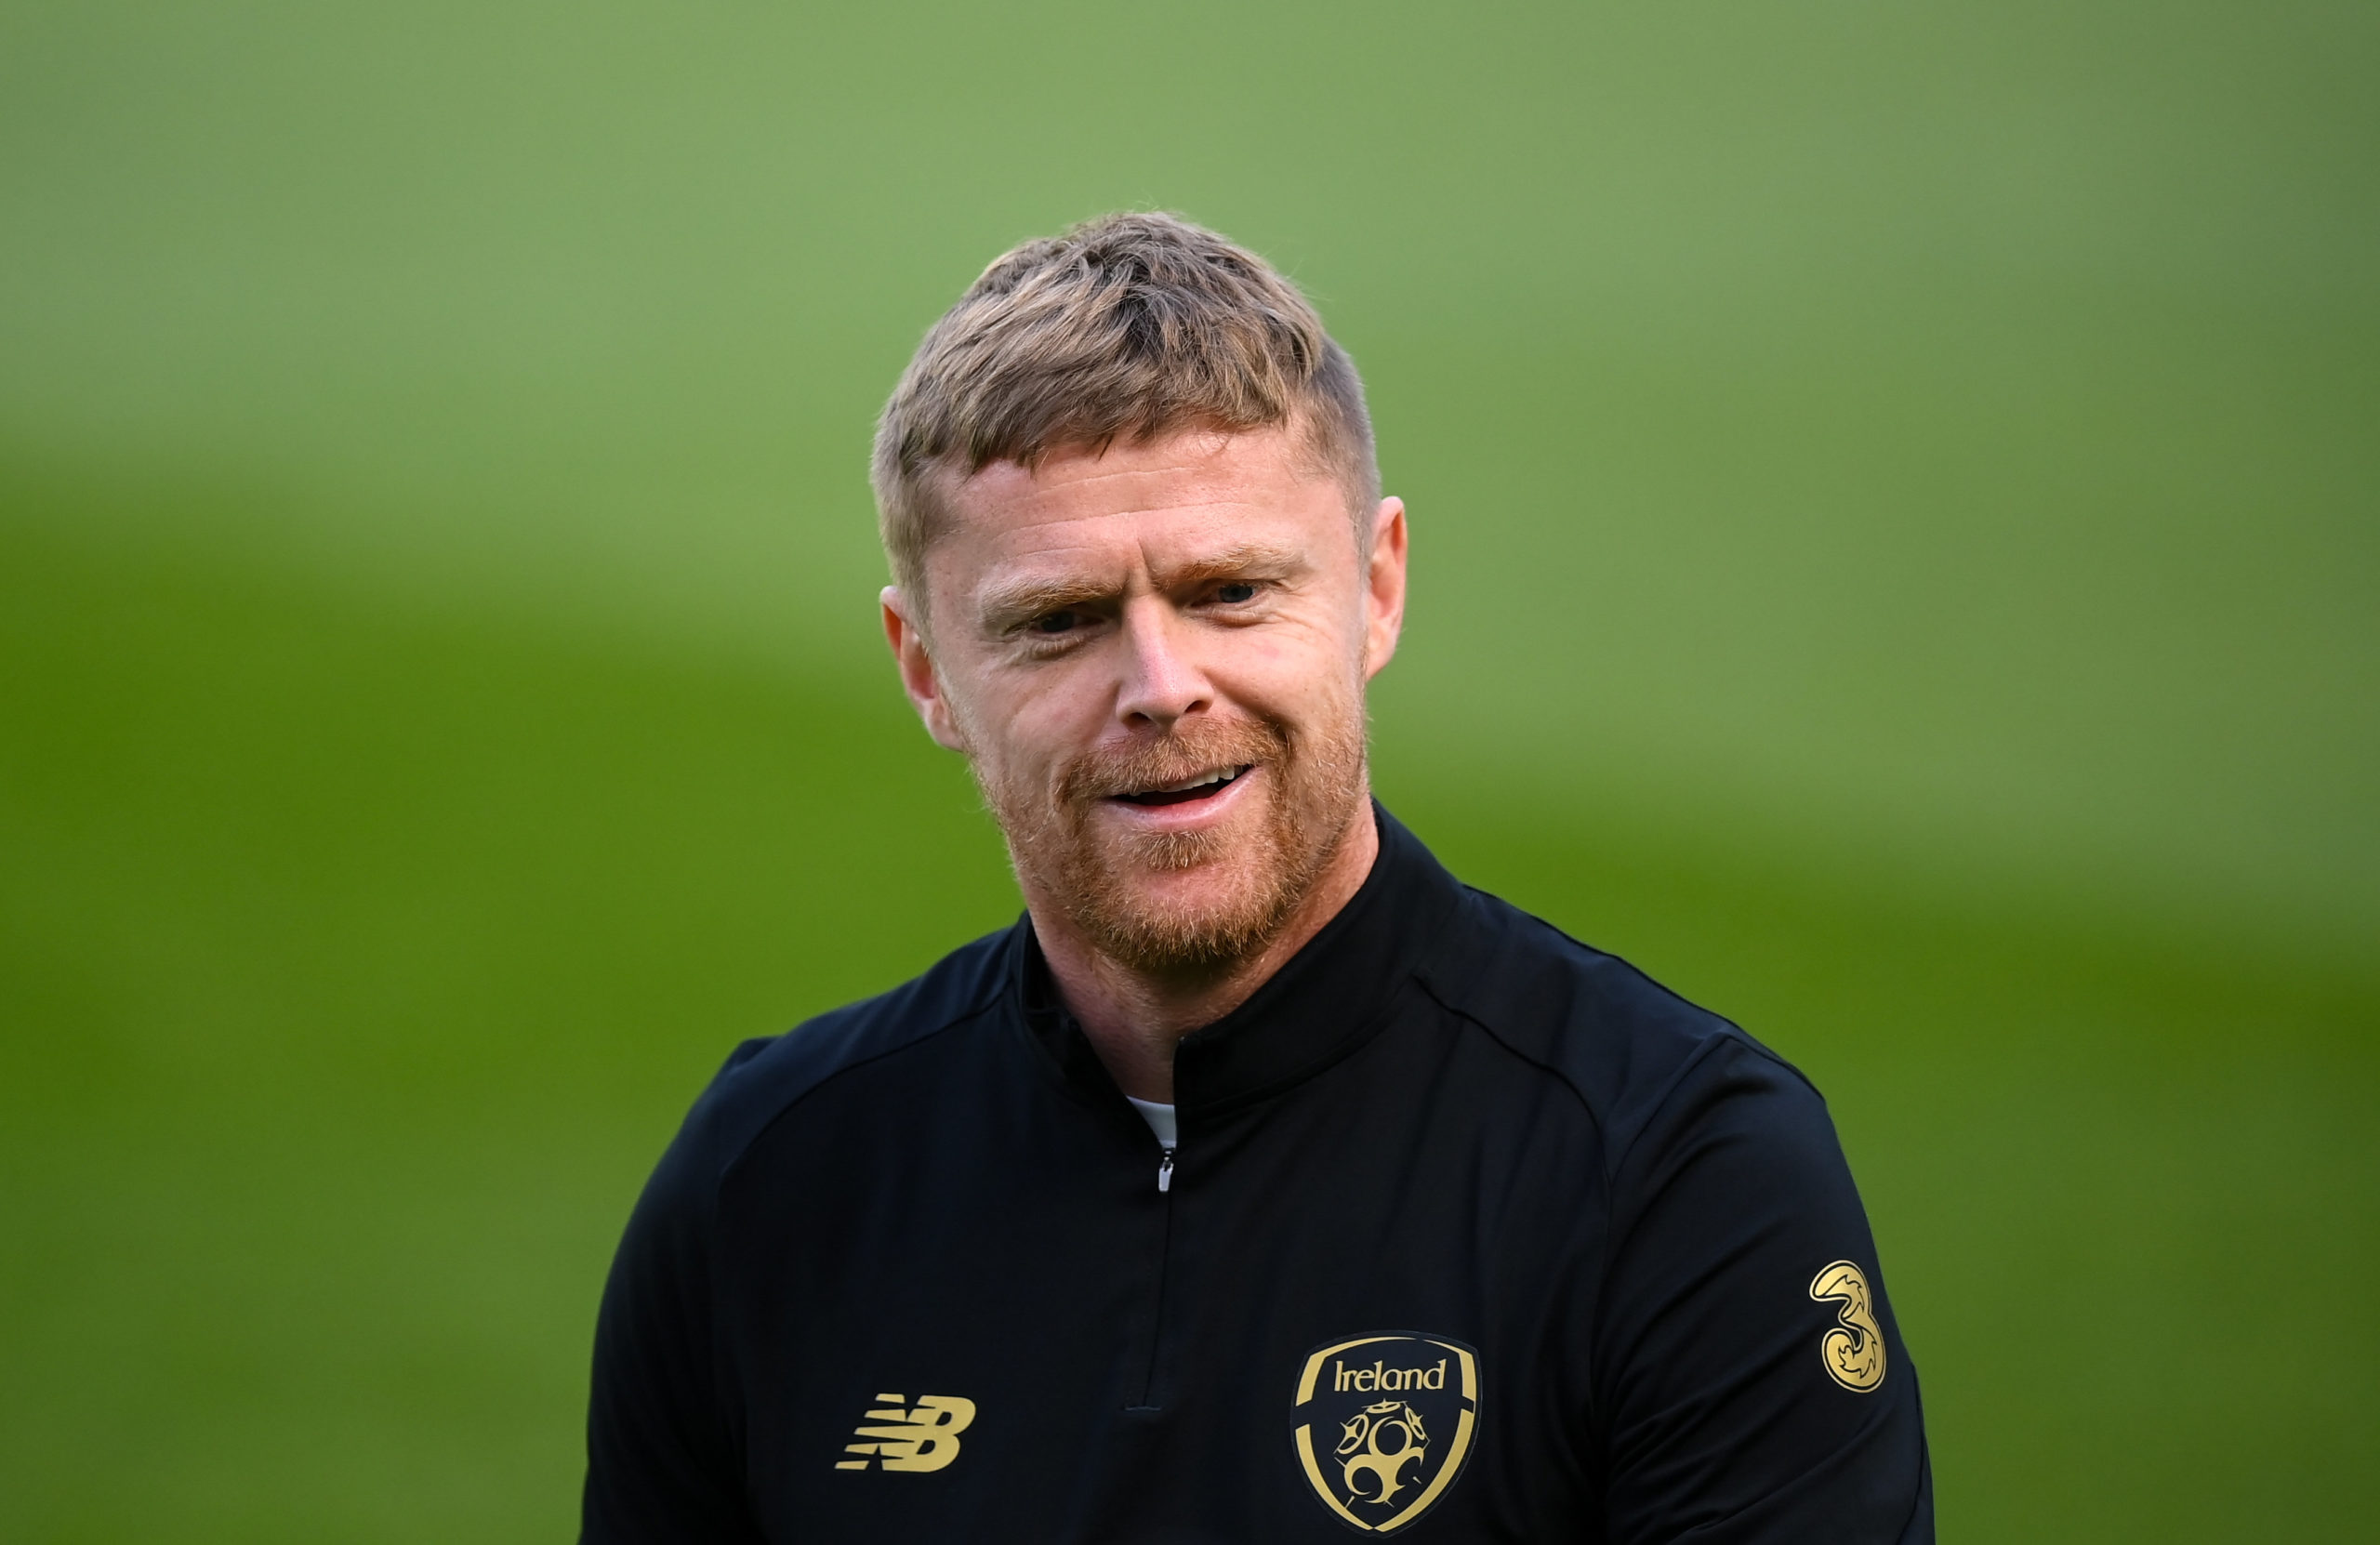 "He's just world class": Damien Duff should be a dark horse for Celtic manager job - opinion